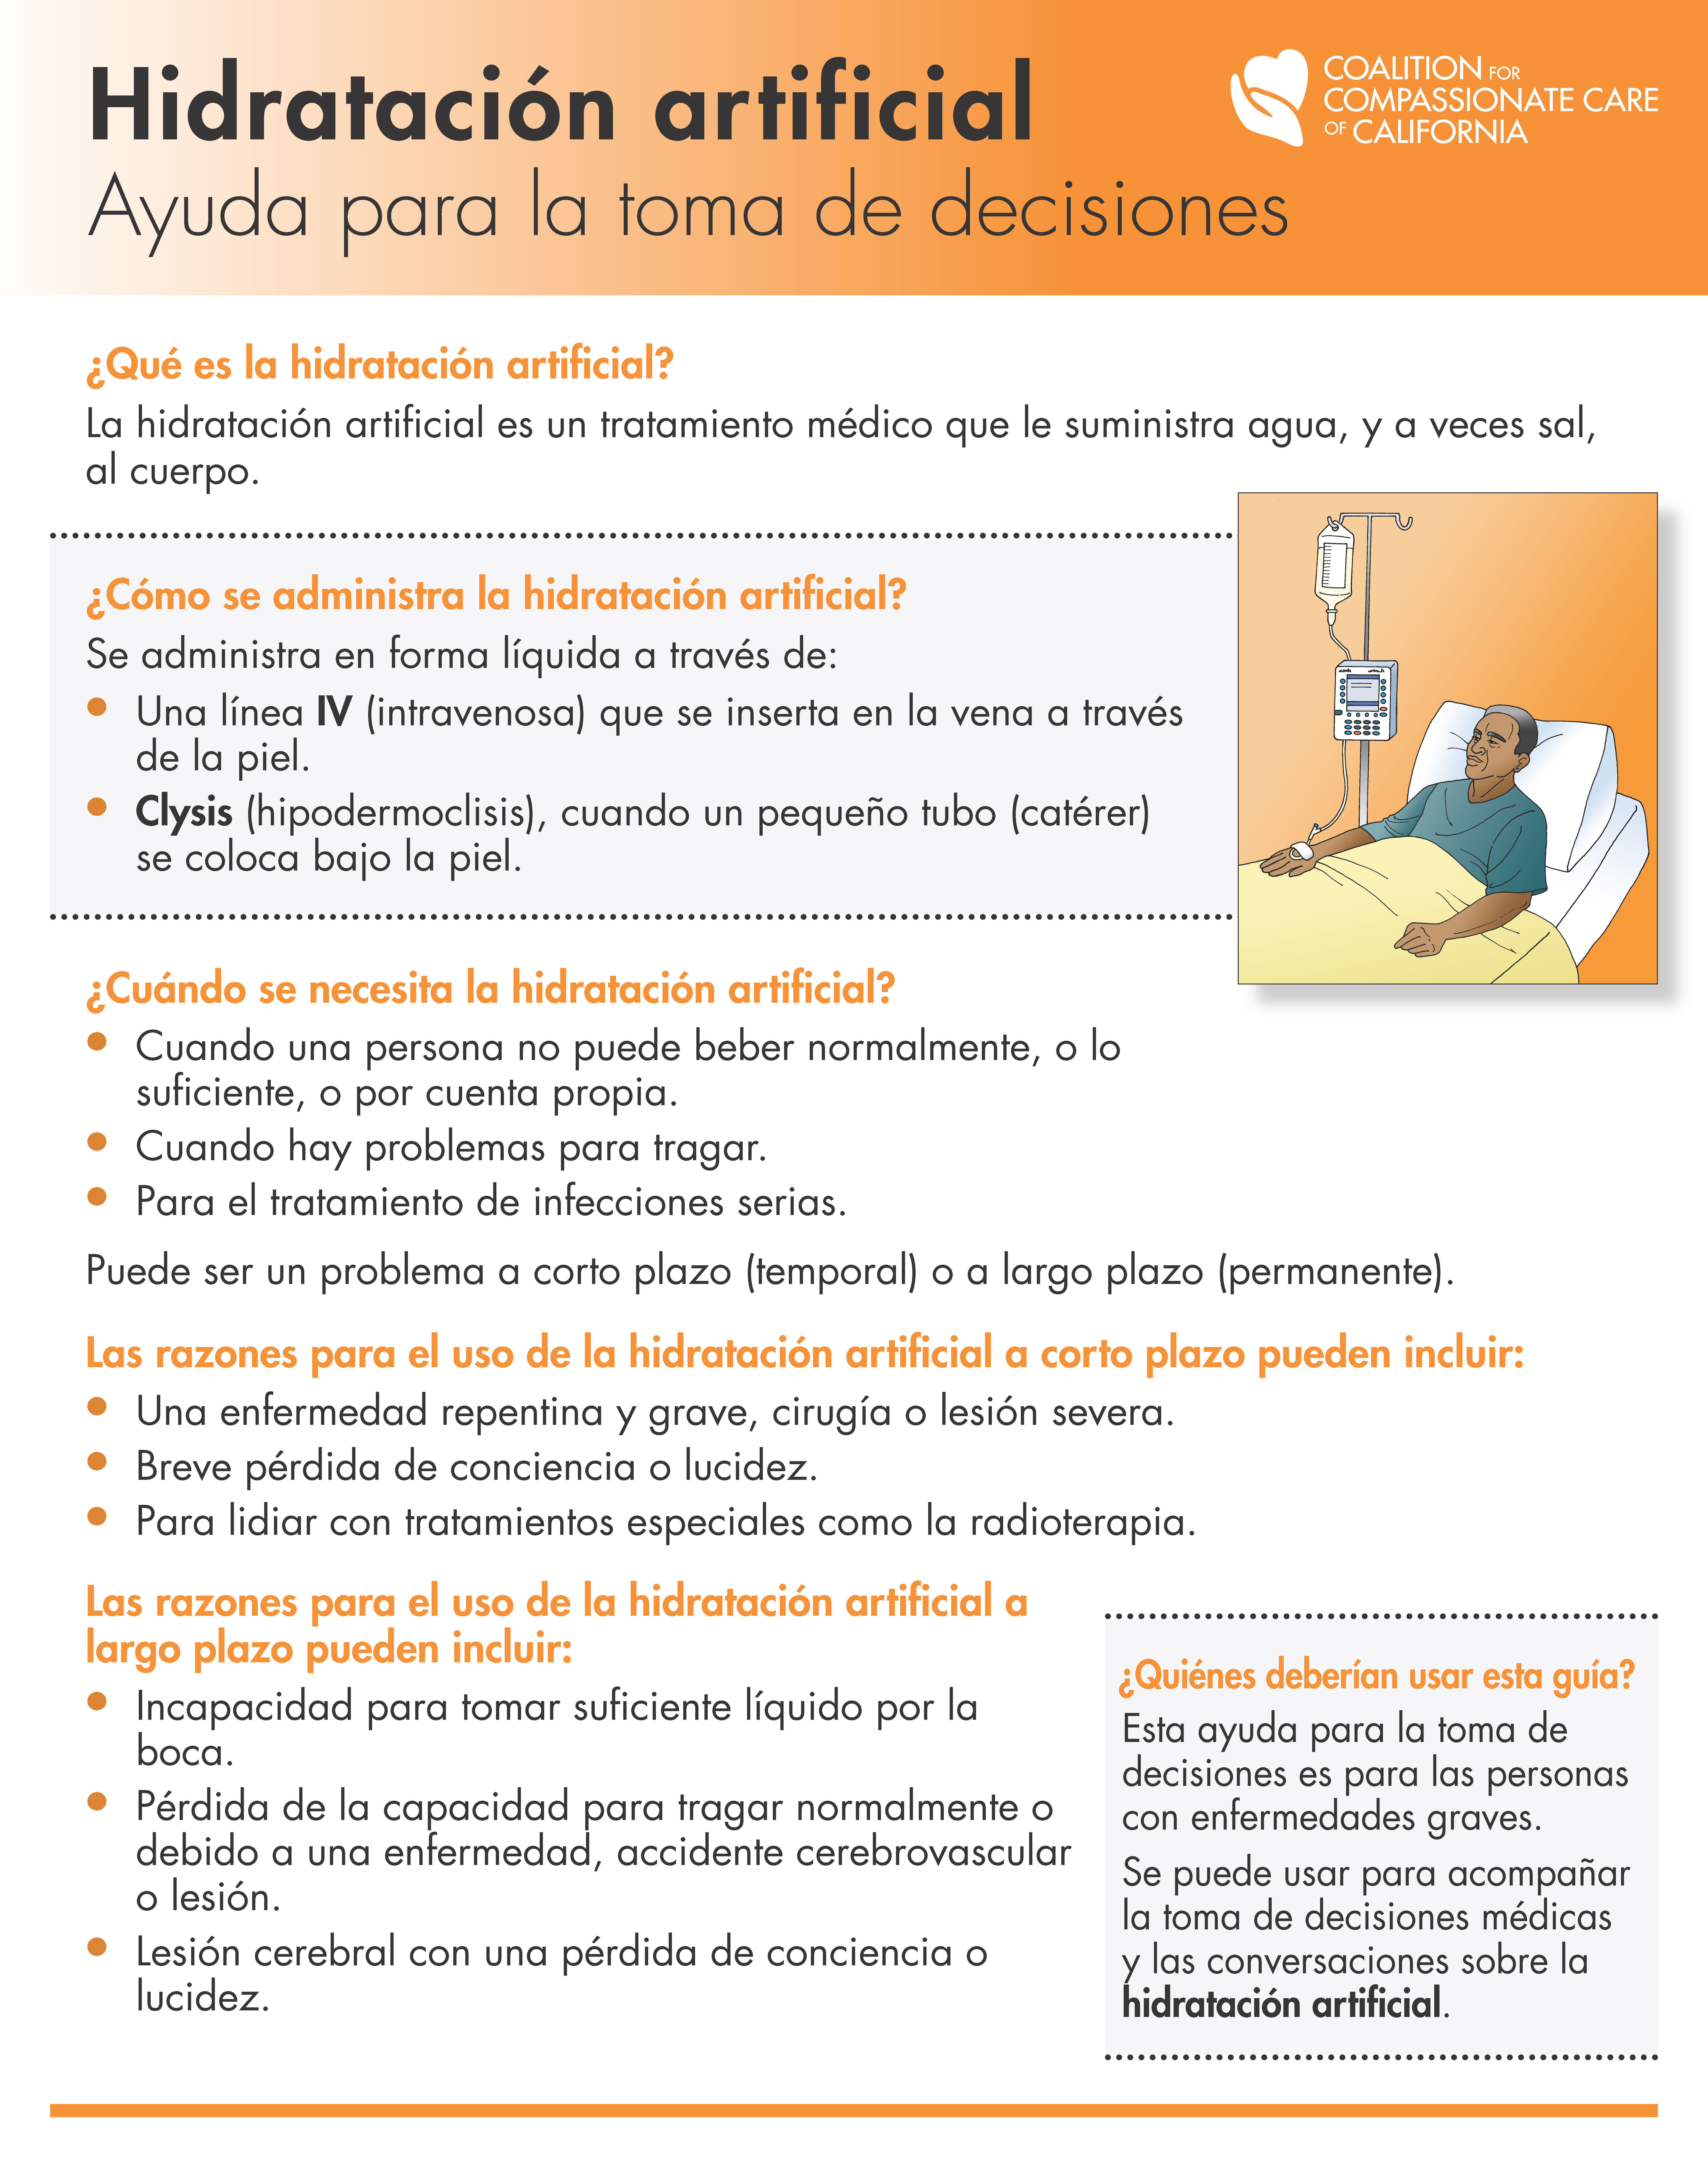 Decision Aid on Artificial Hydration – Spanish